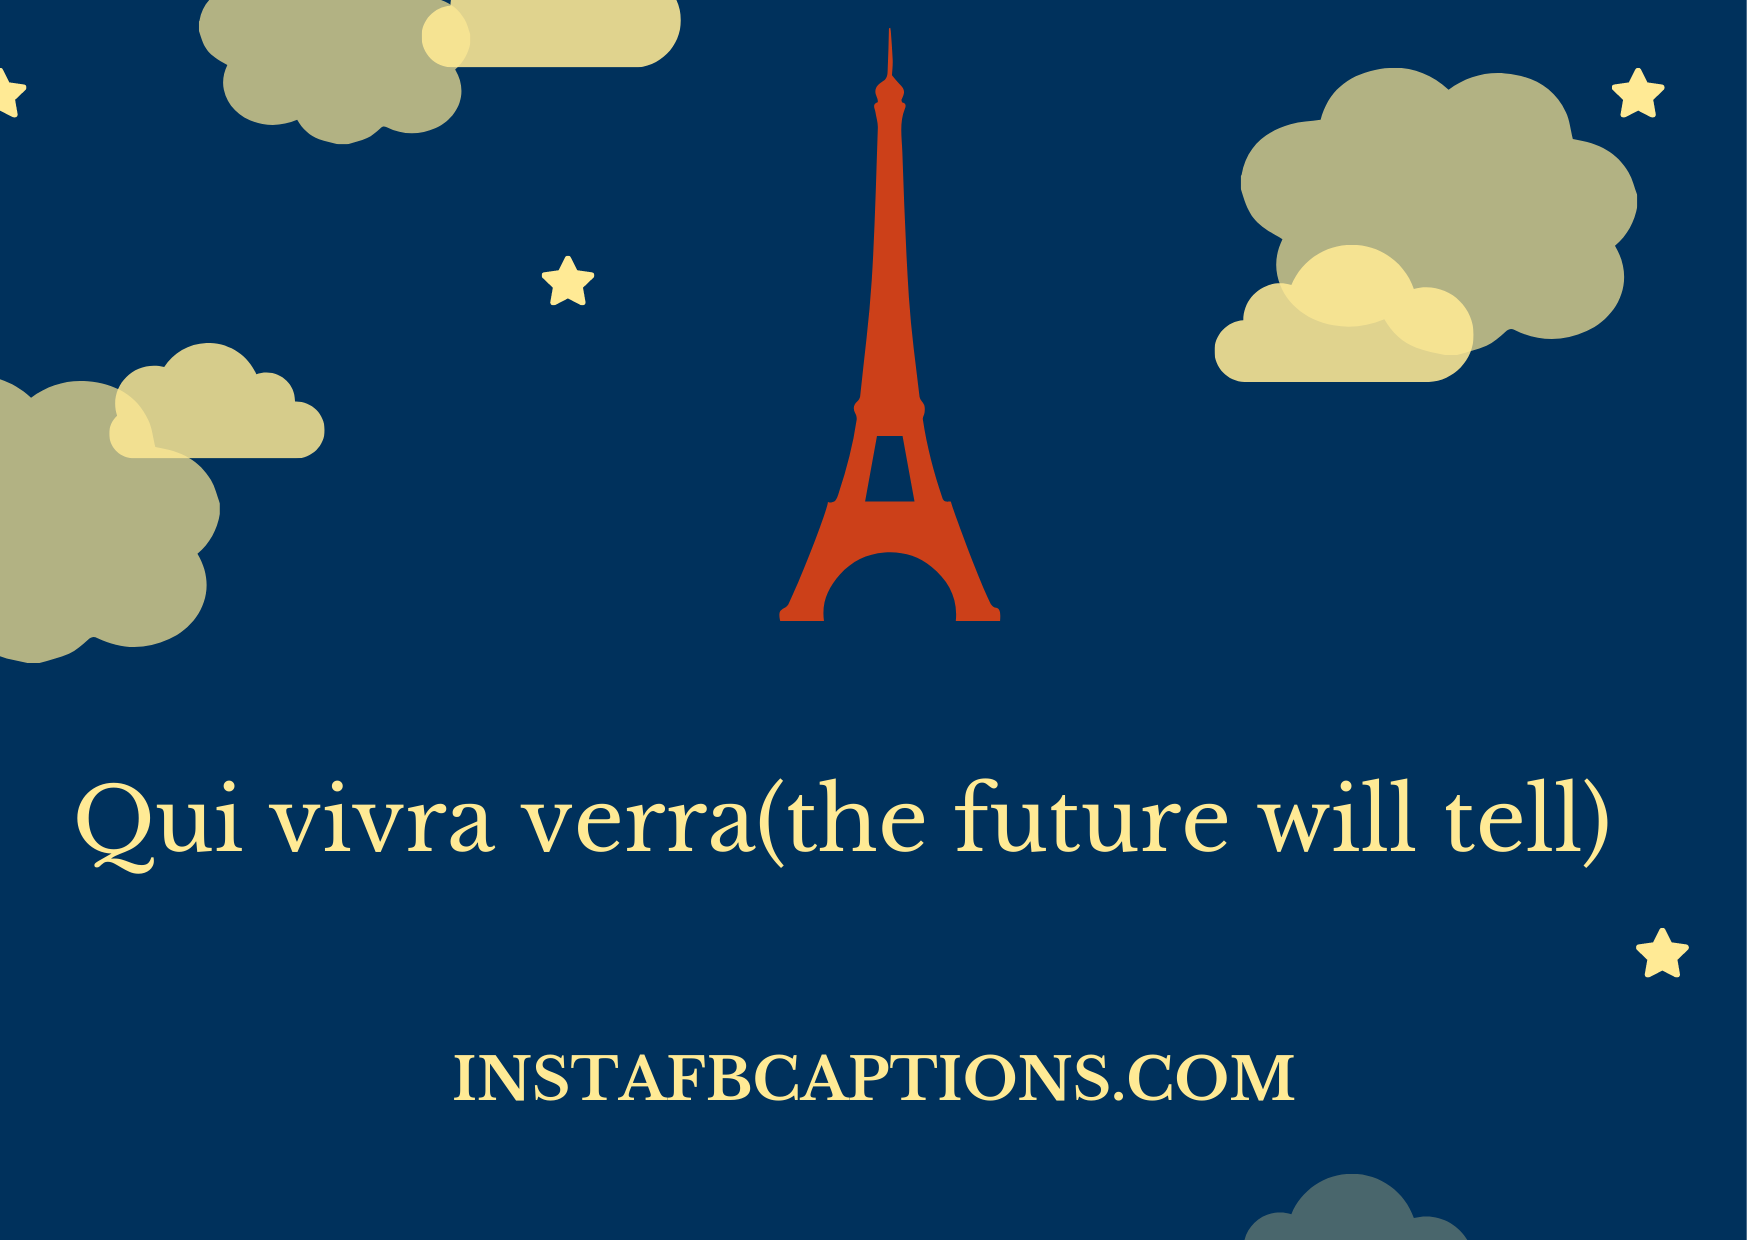 Cute Instagram Captions In French  - Cute Instagram Captions in French - FRENCH Instagram Captions with Meaning in 2022